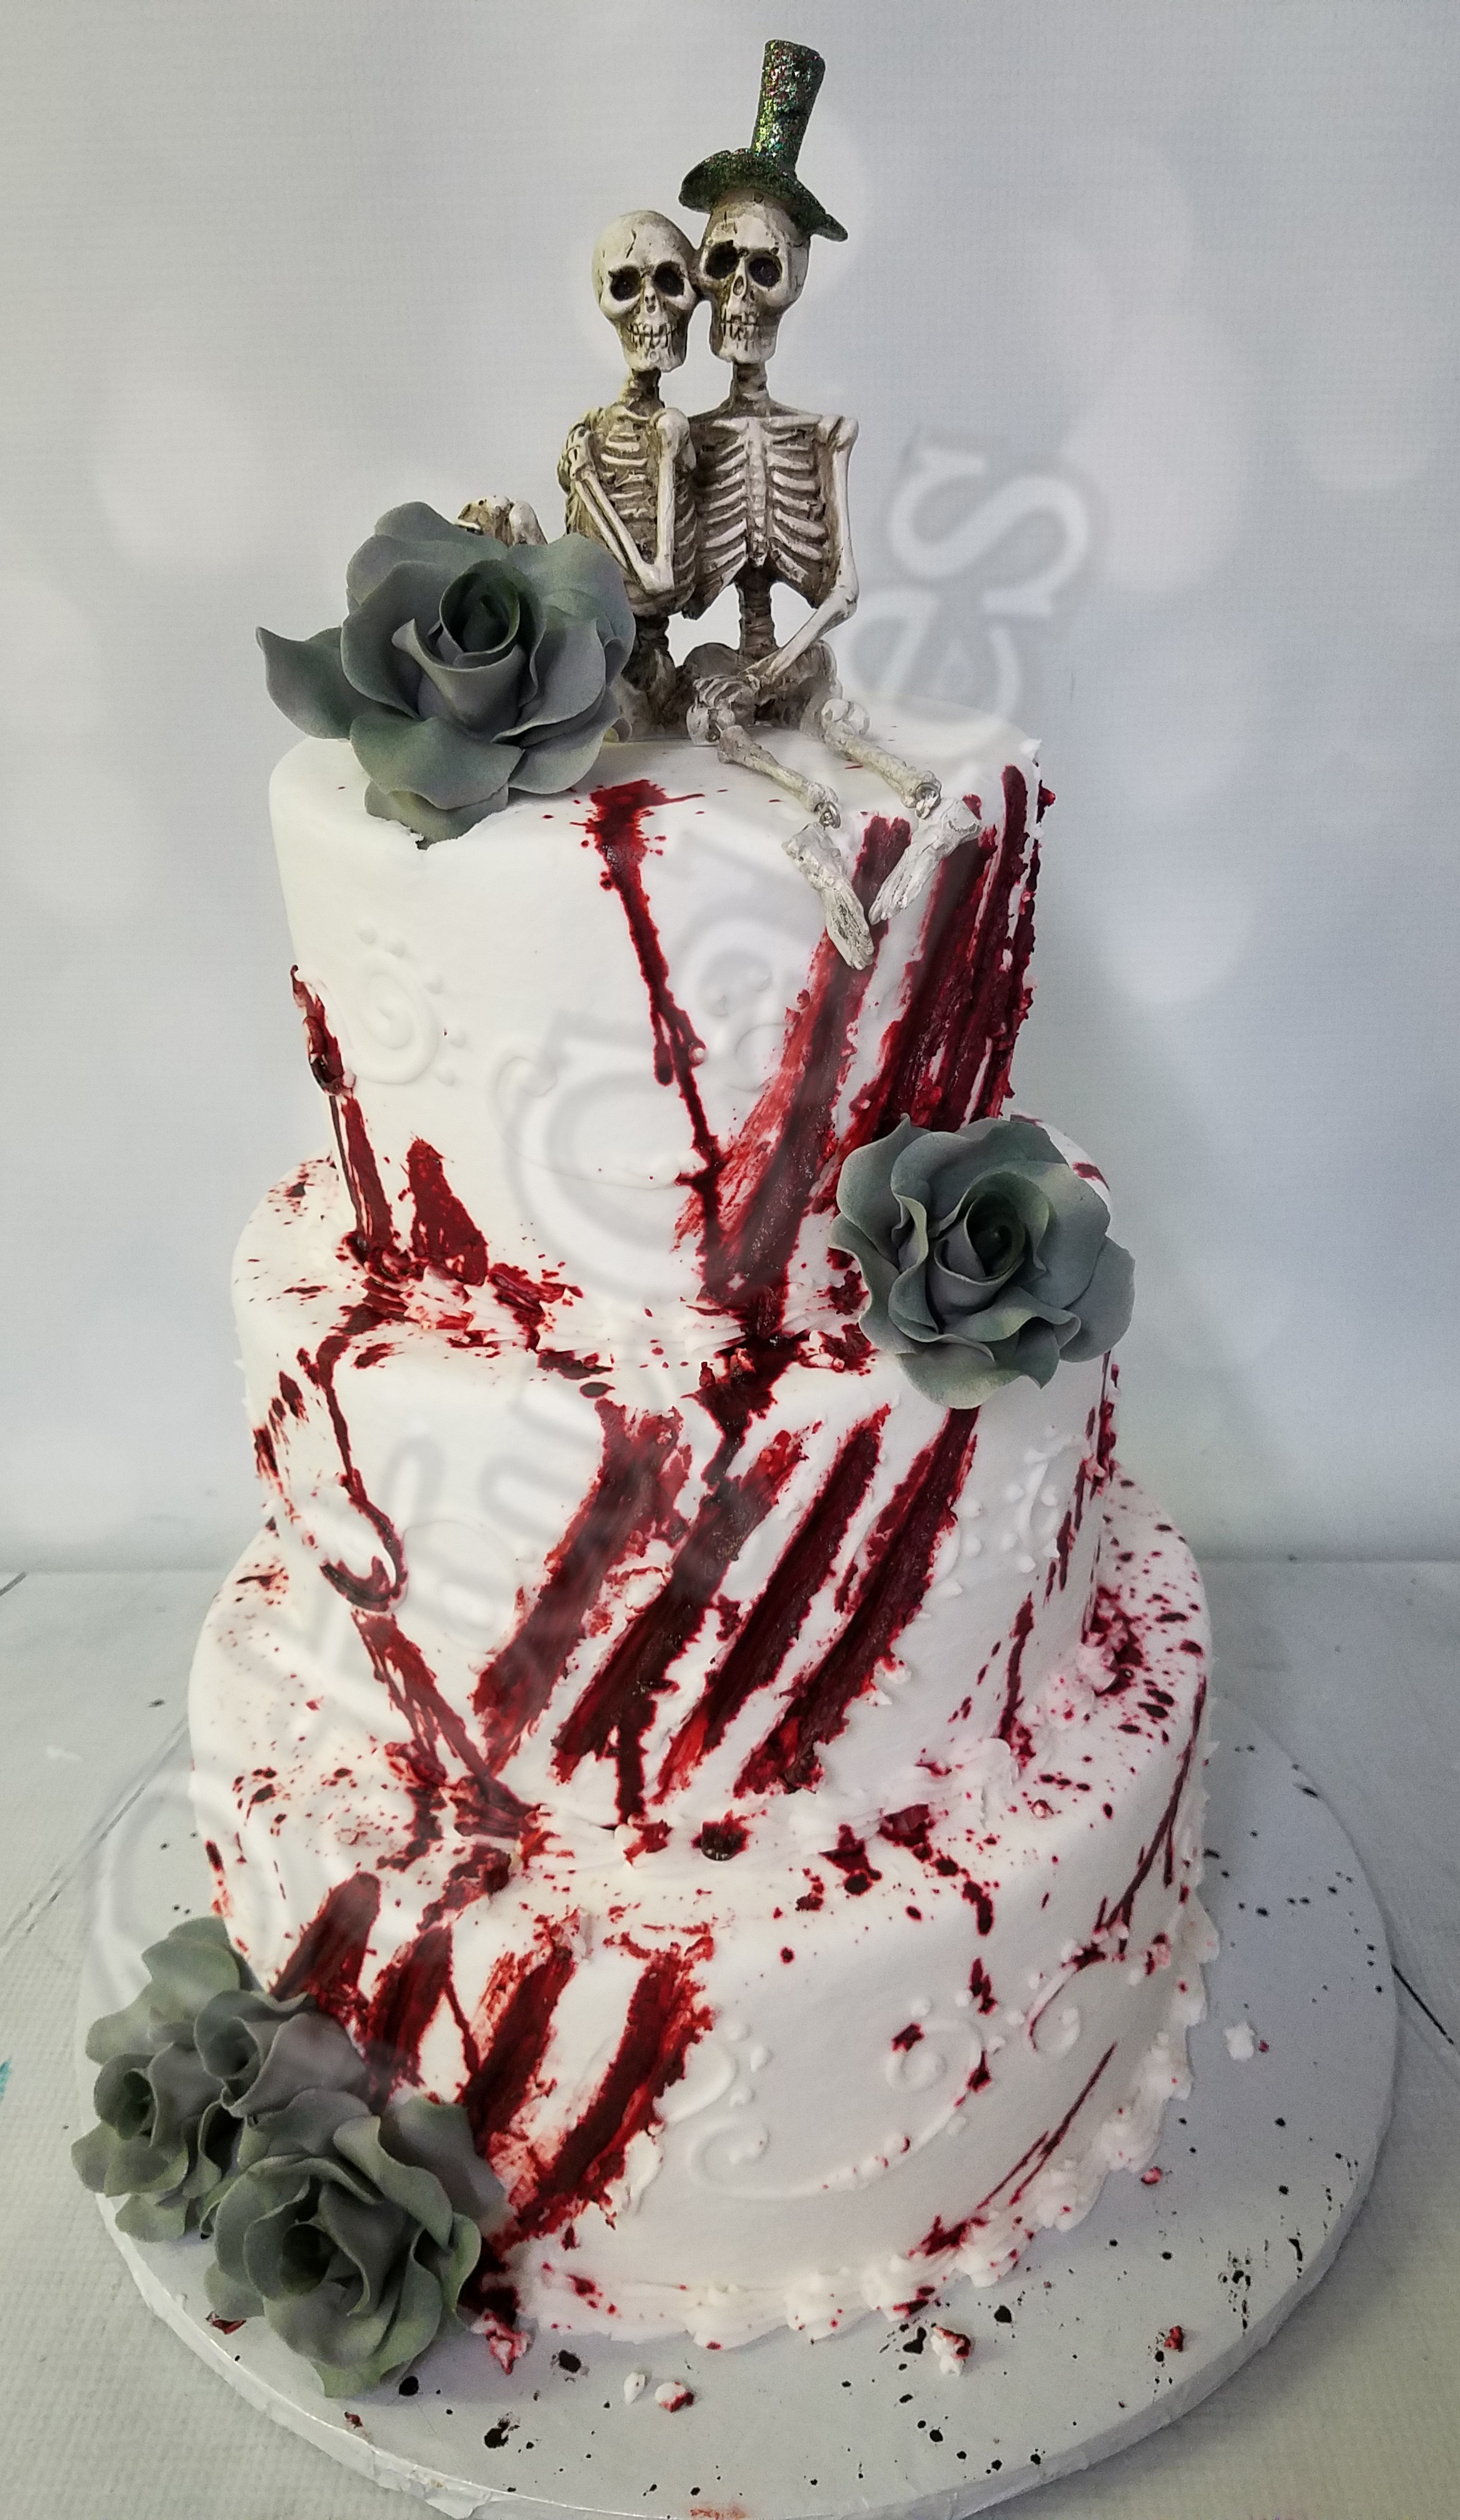 Best Bloody Wedding Cakes from Wedding 412 - Patty Cakes - Highland IL. 